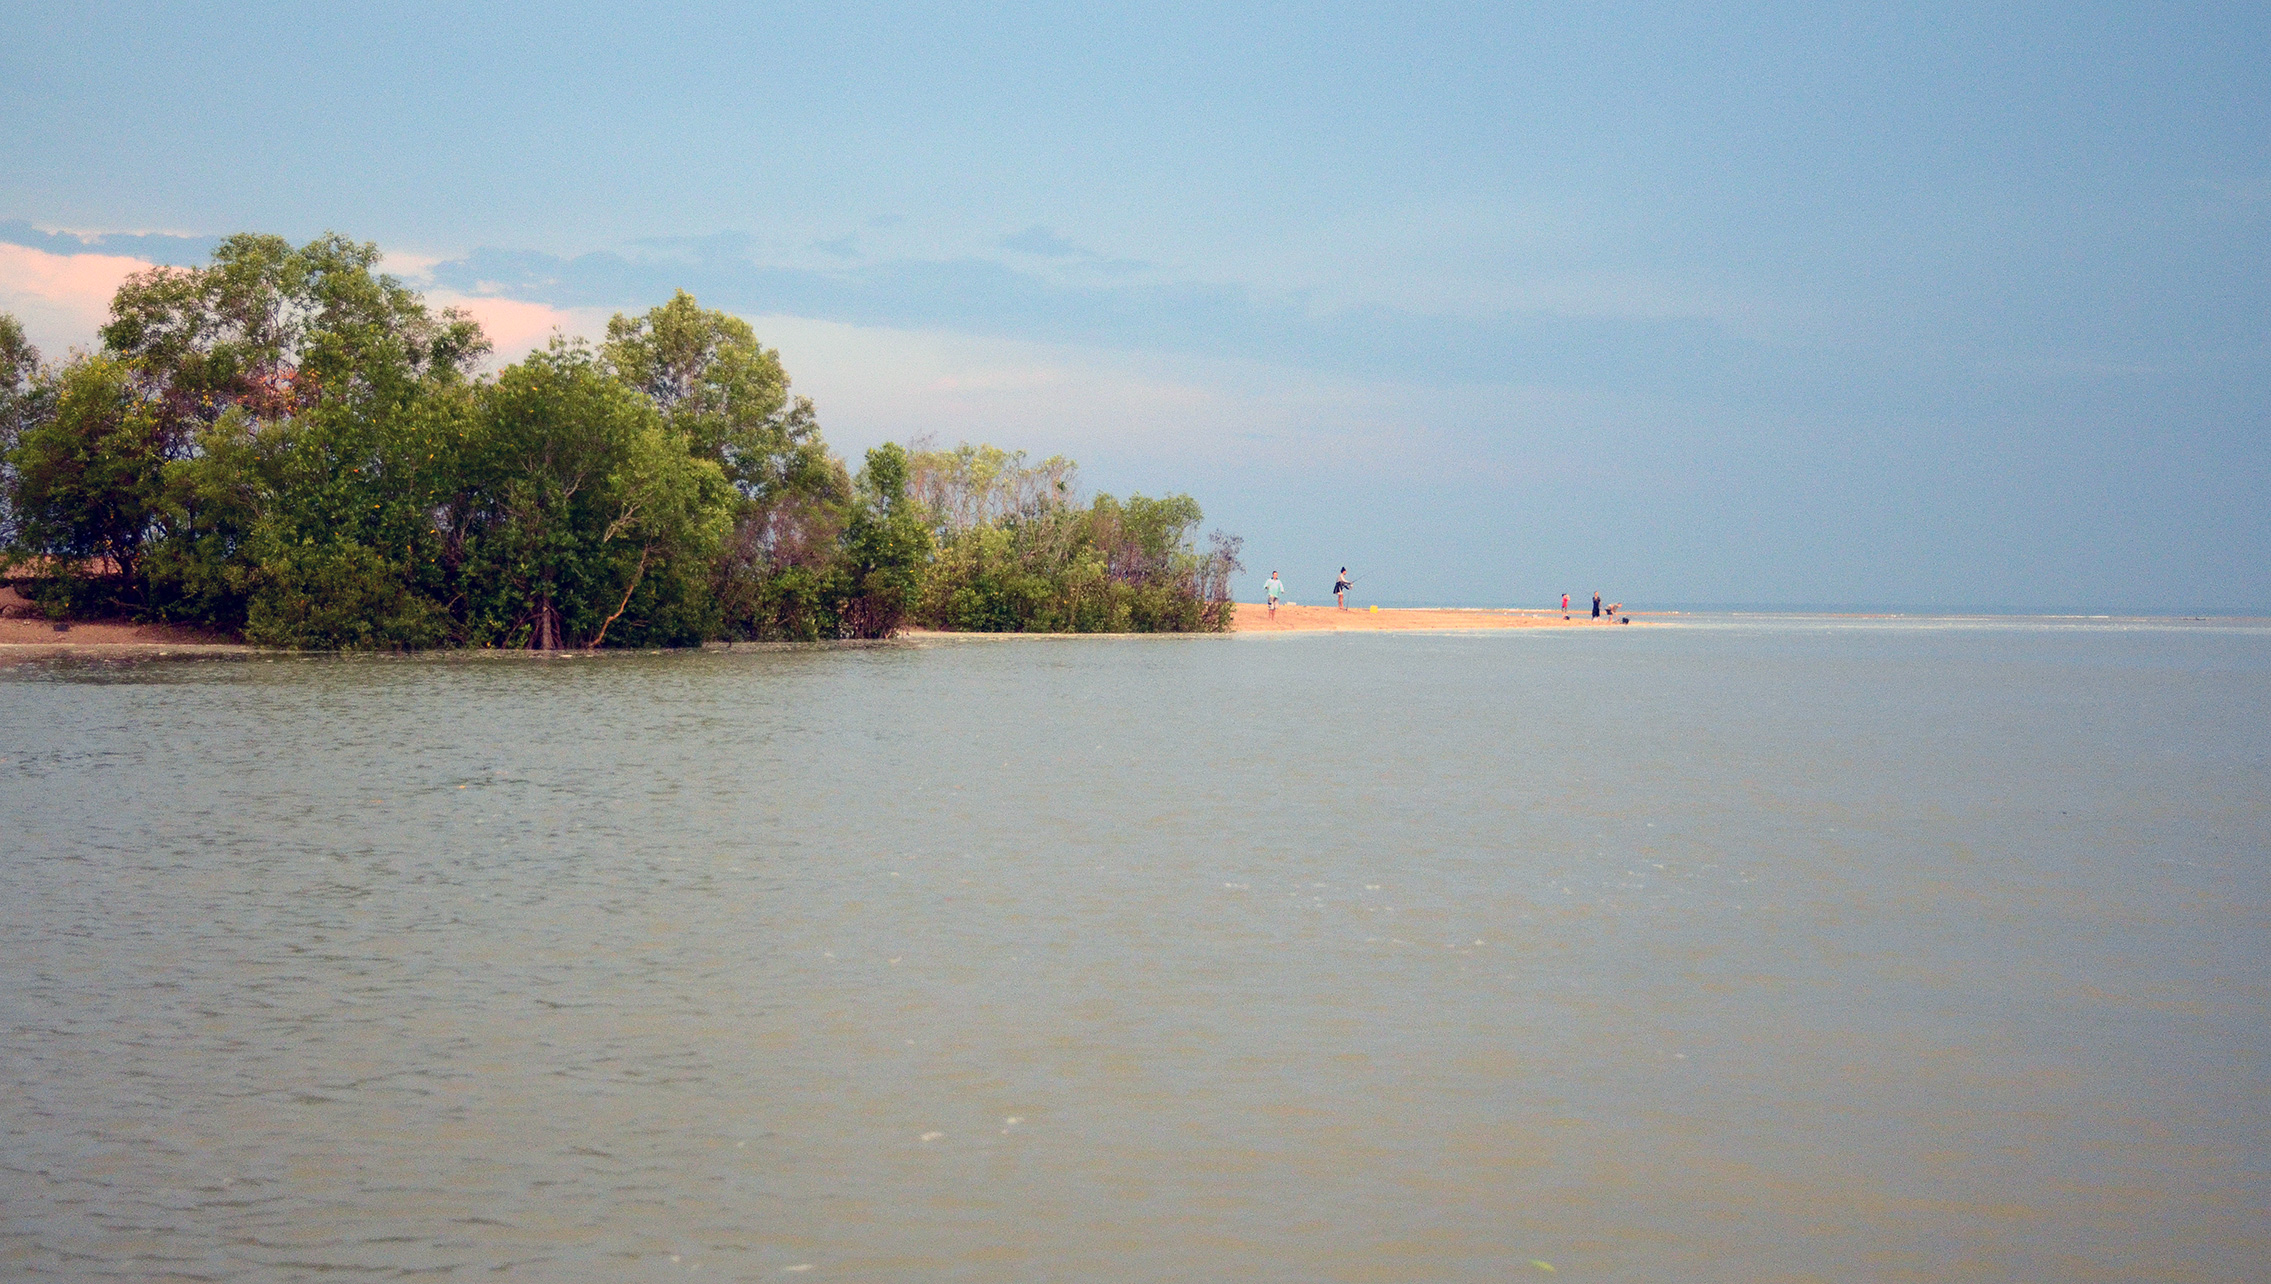 Hopeful anglers fishing from a sandspit at the mouth of Buffalo Creek on Darwin's outskirts. This would not be a smart move at night and even during the day, you need your wits about you!